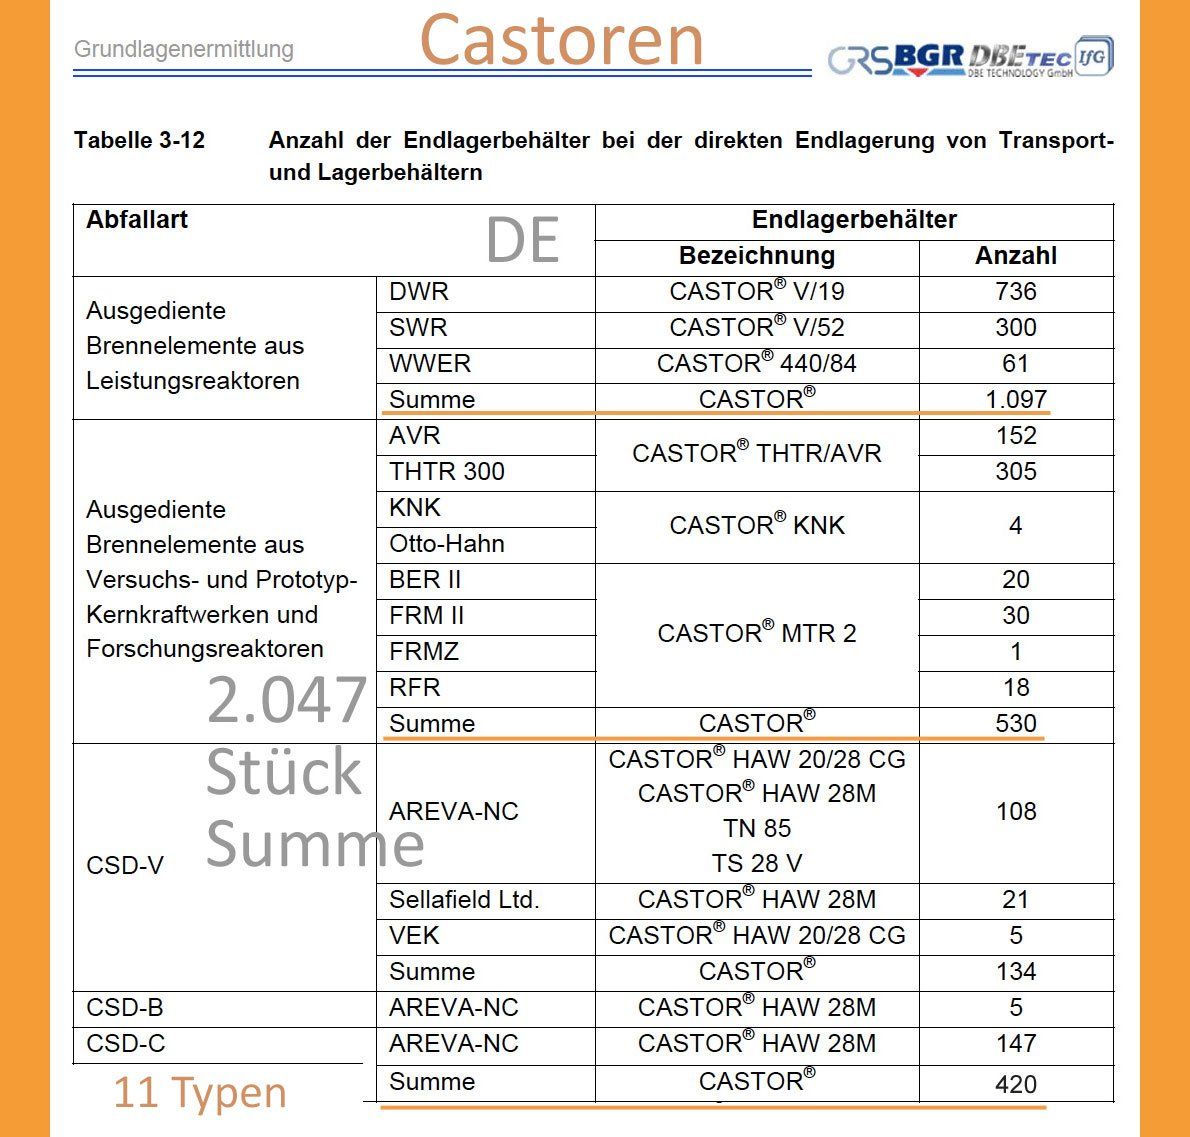 >>> all German nuclear high level waste in 11 Types of Castors. app. 60 % are loaded already - it will be 2.047 Castors in the end. But actual political dicussion is about to longer the nuclear power plant electric power production for another 4 years.